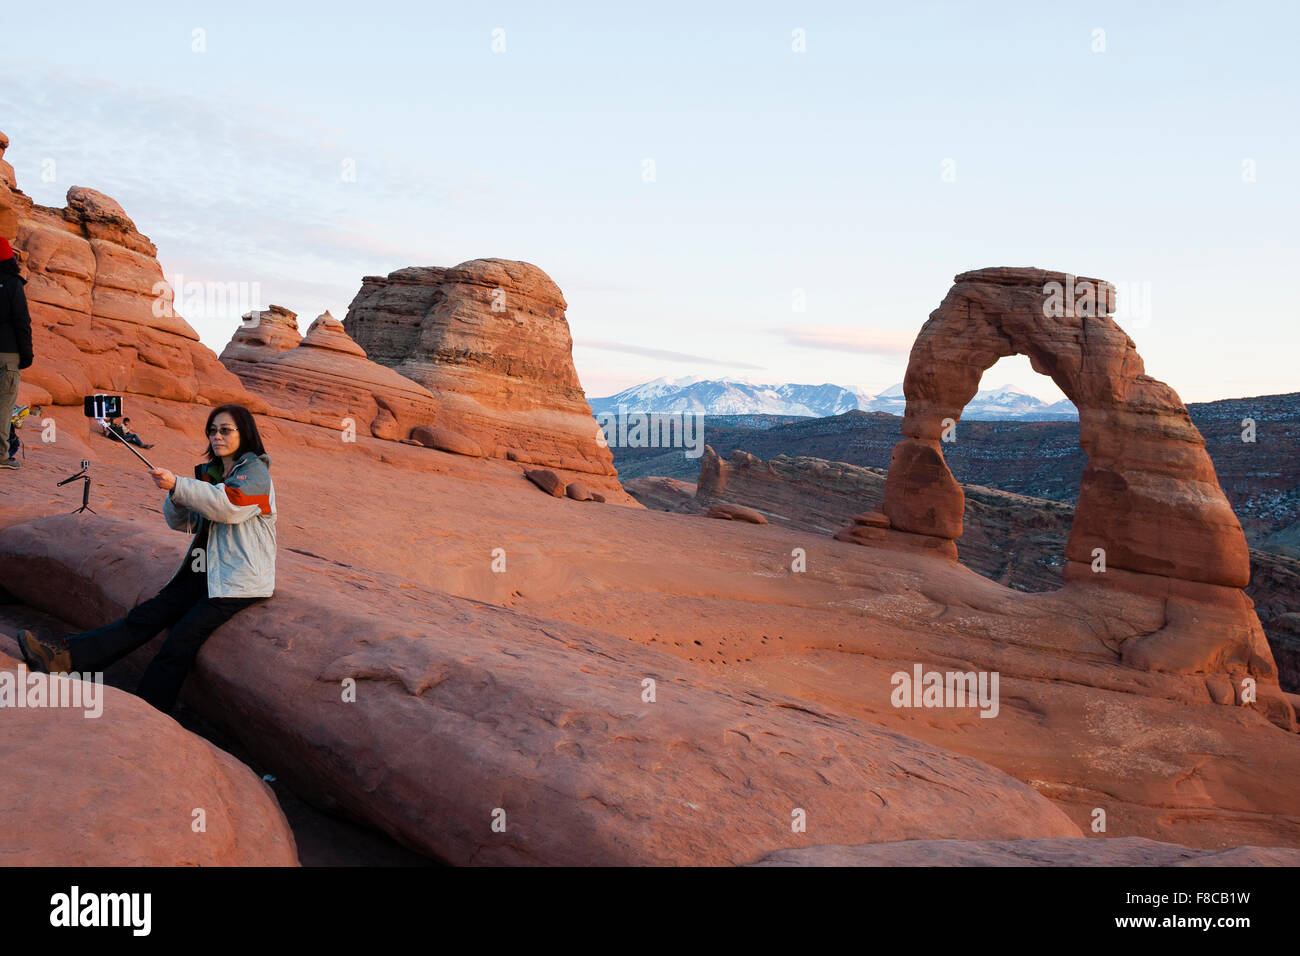 Arches National Park, Utah, USA. A female tourist takes a selfie in front of Delicate Arch. Stock Photo